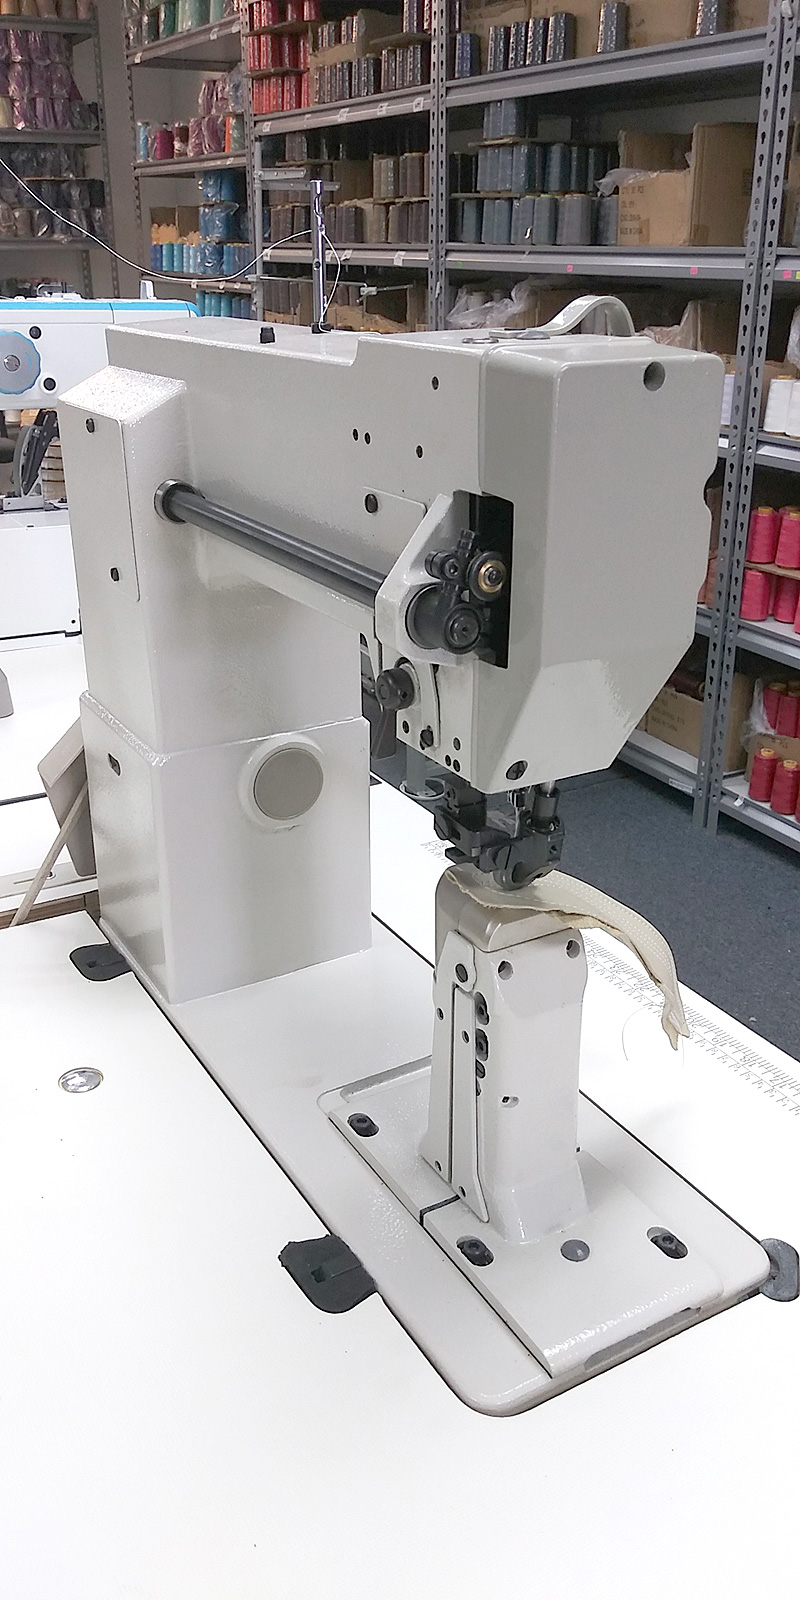 THOR GC-8810 Roller Foot Post Bed Sewing Machine